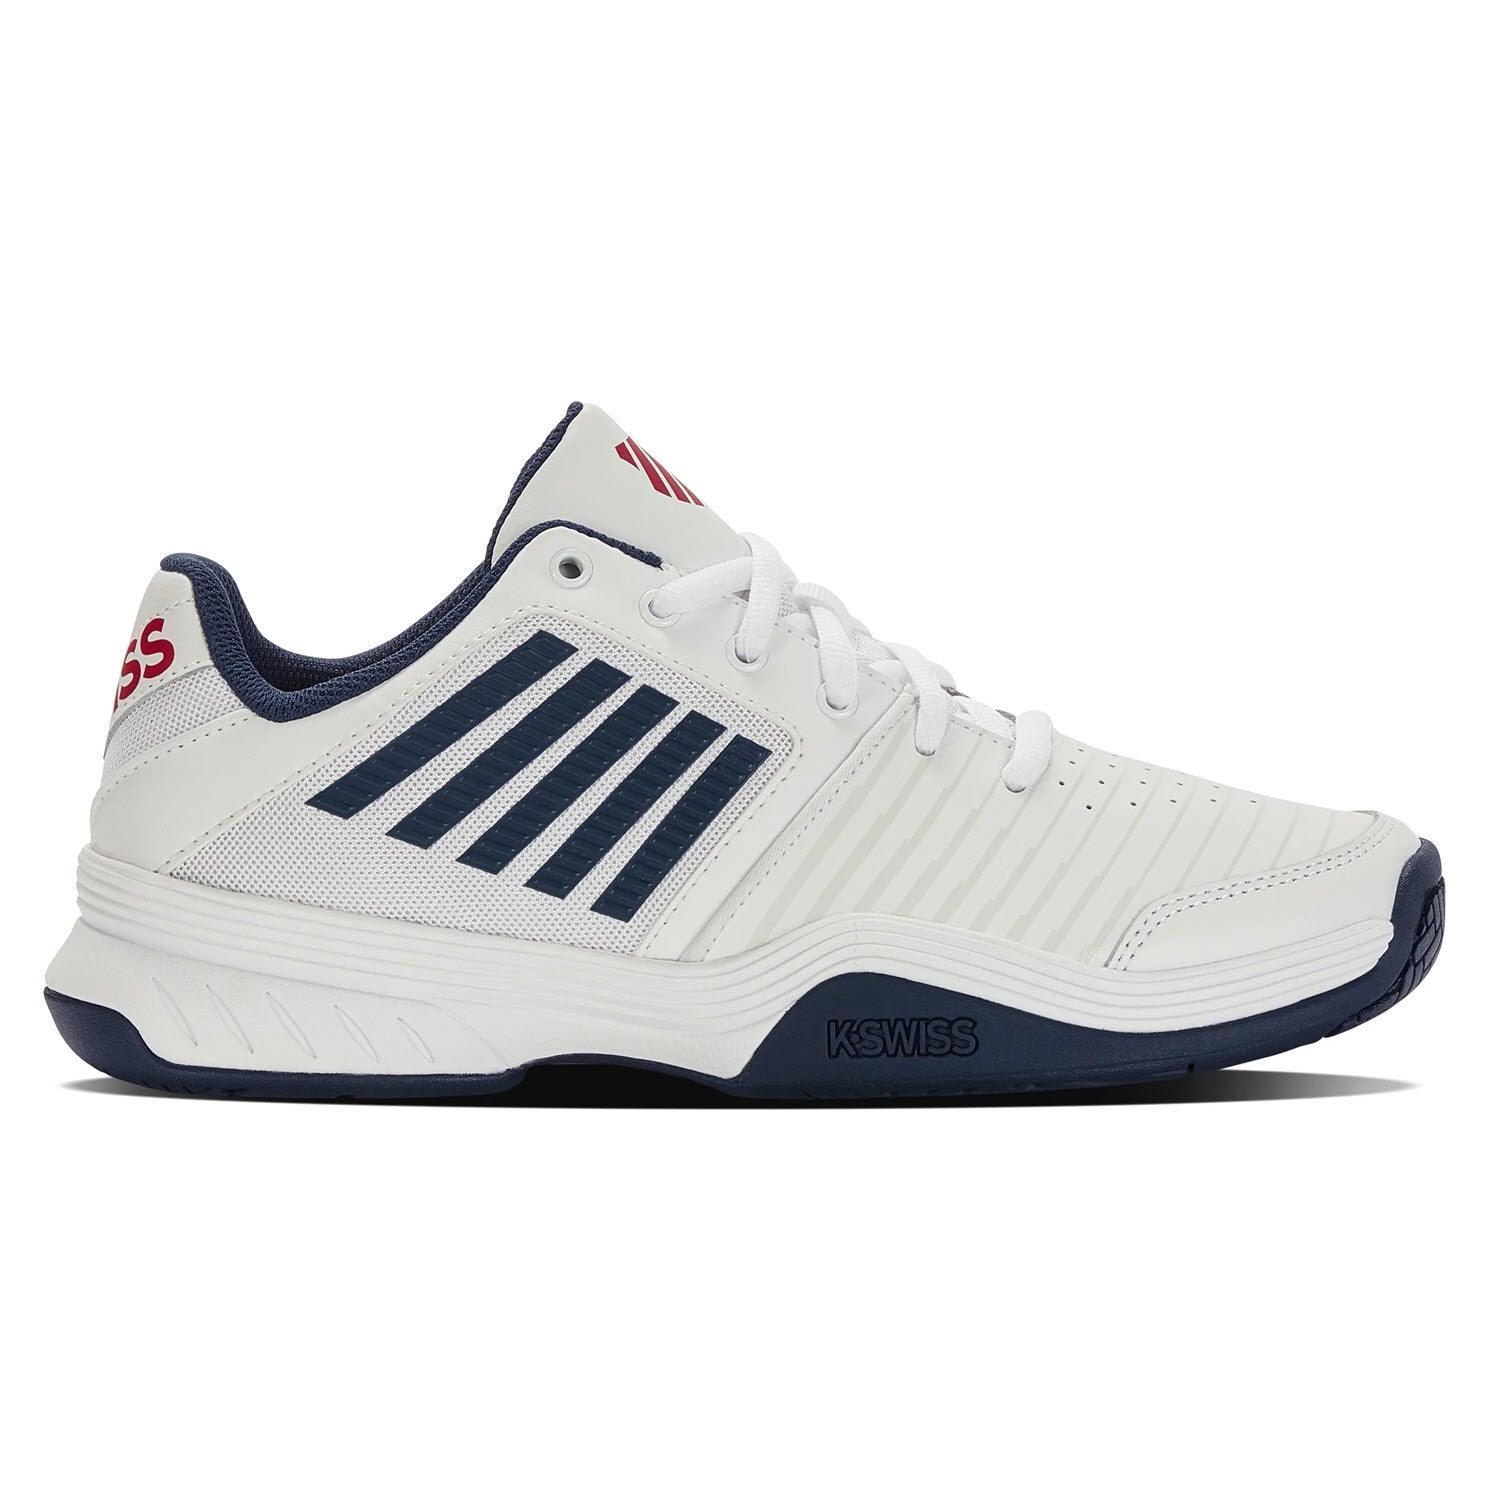 K-Swiss Court Express White/Blue - Mens shoe with red detailing, viewed from the side.